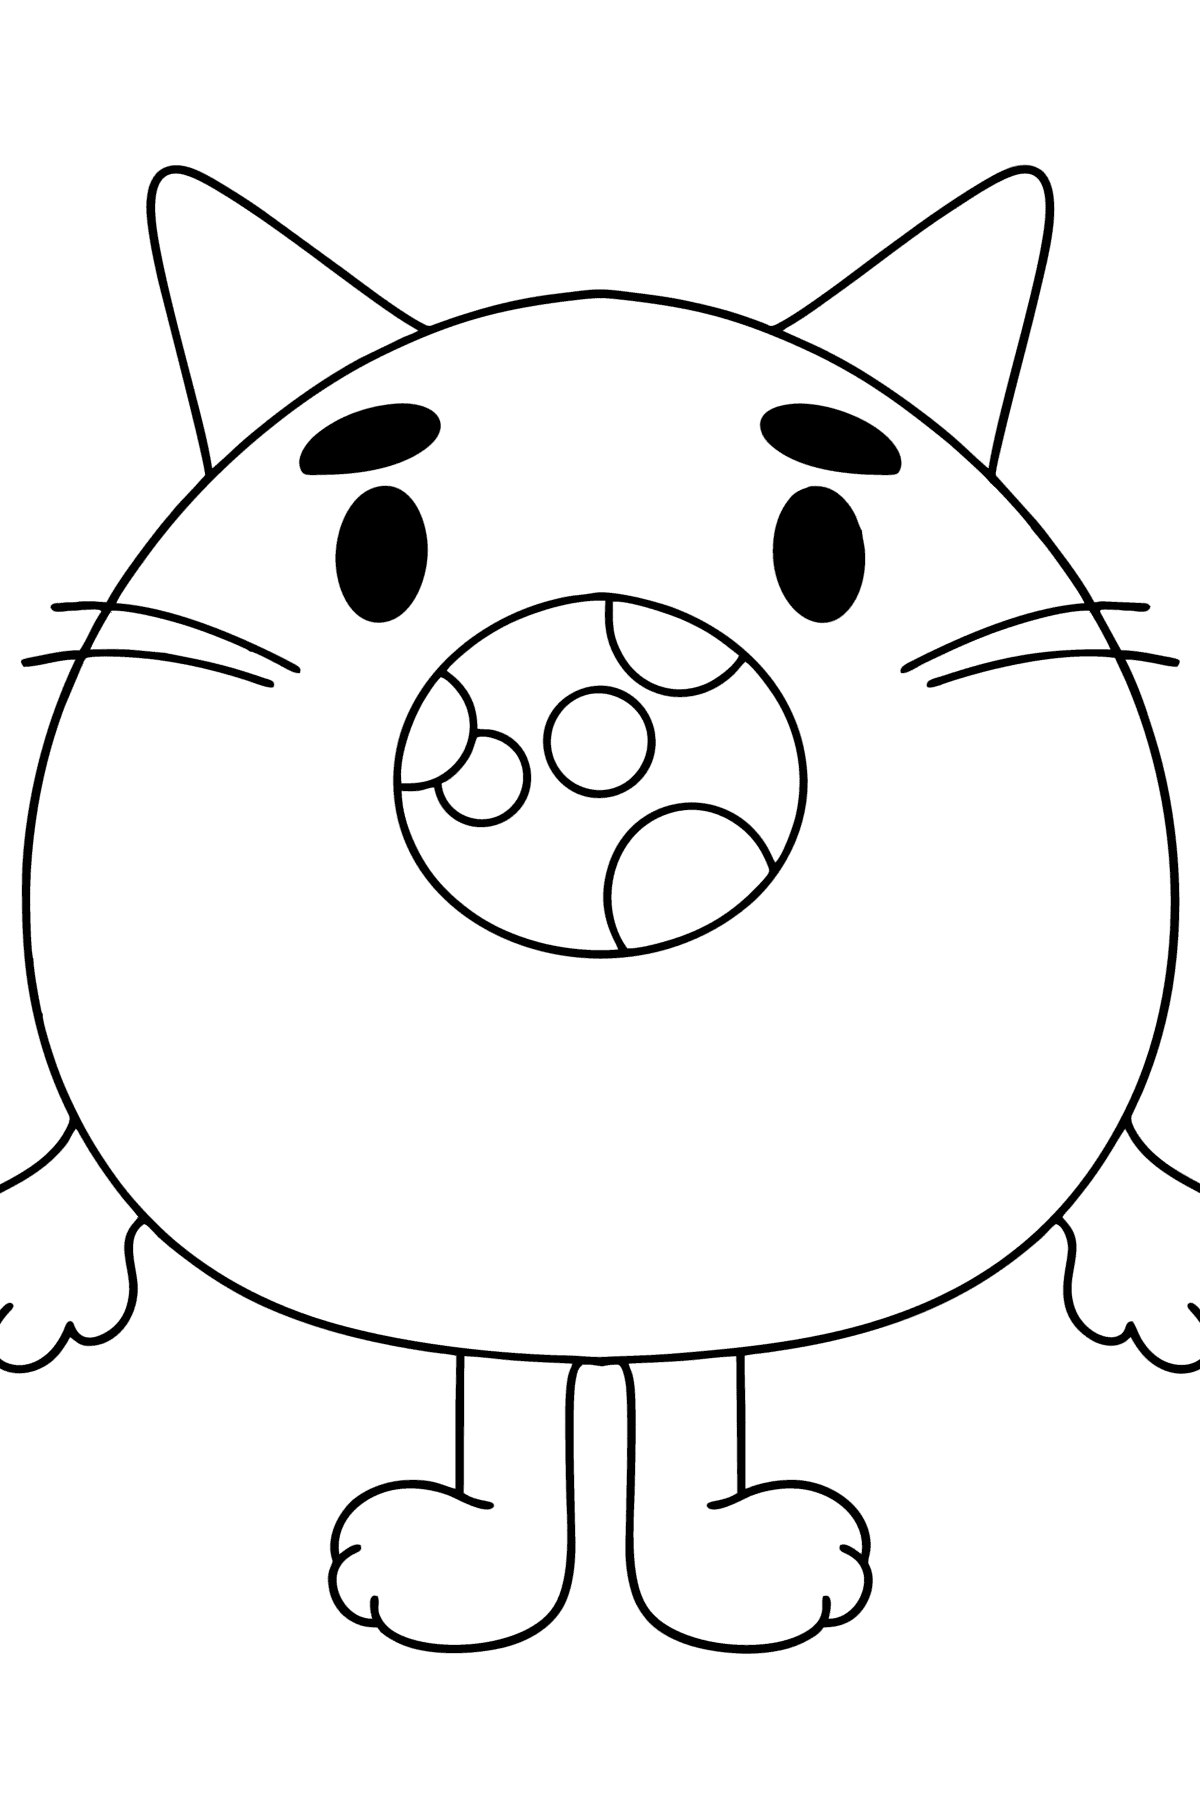 Coloring page Tocaboca heroes 07 - Coloring Pages for Kids